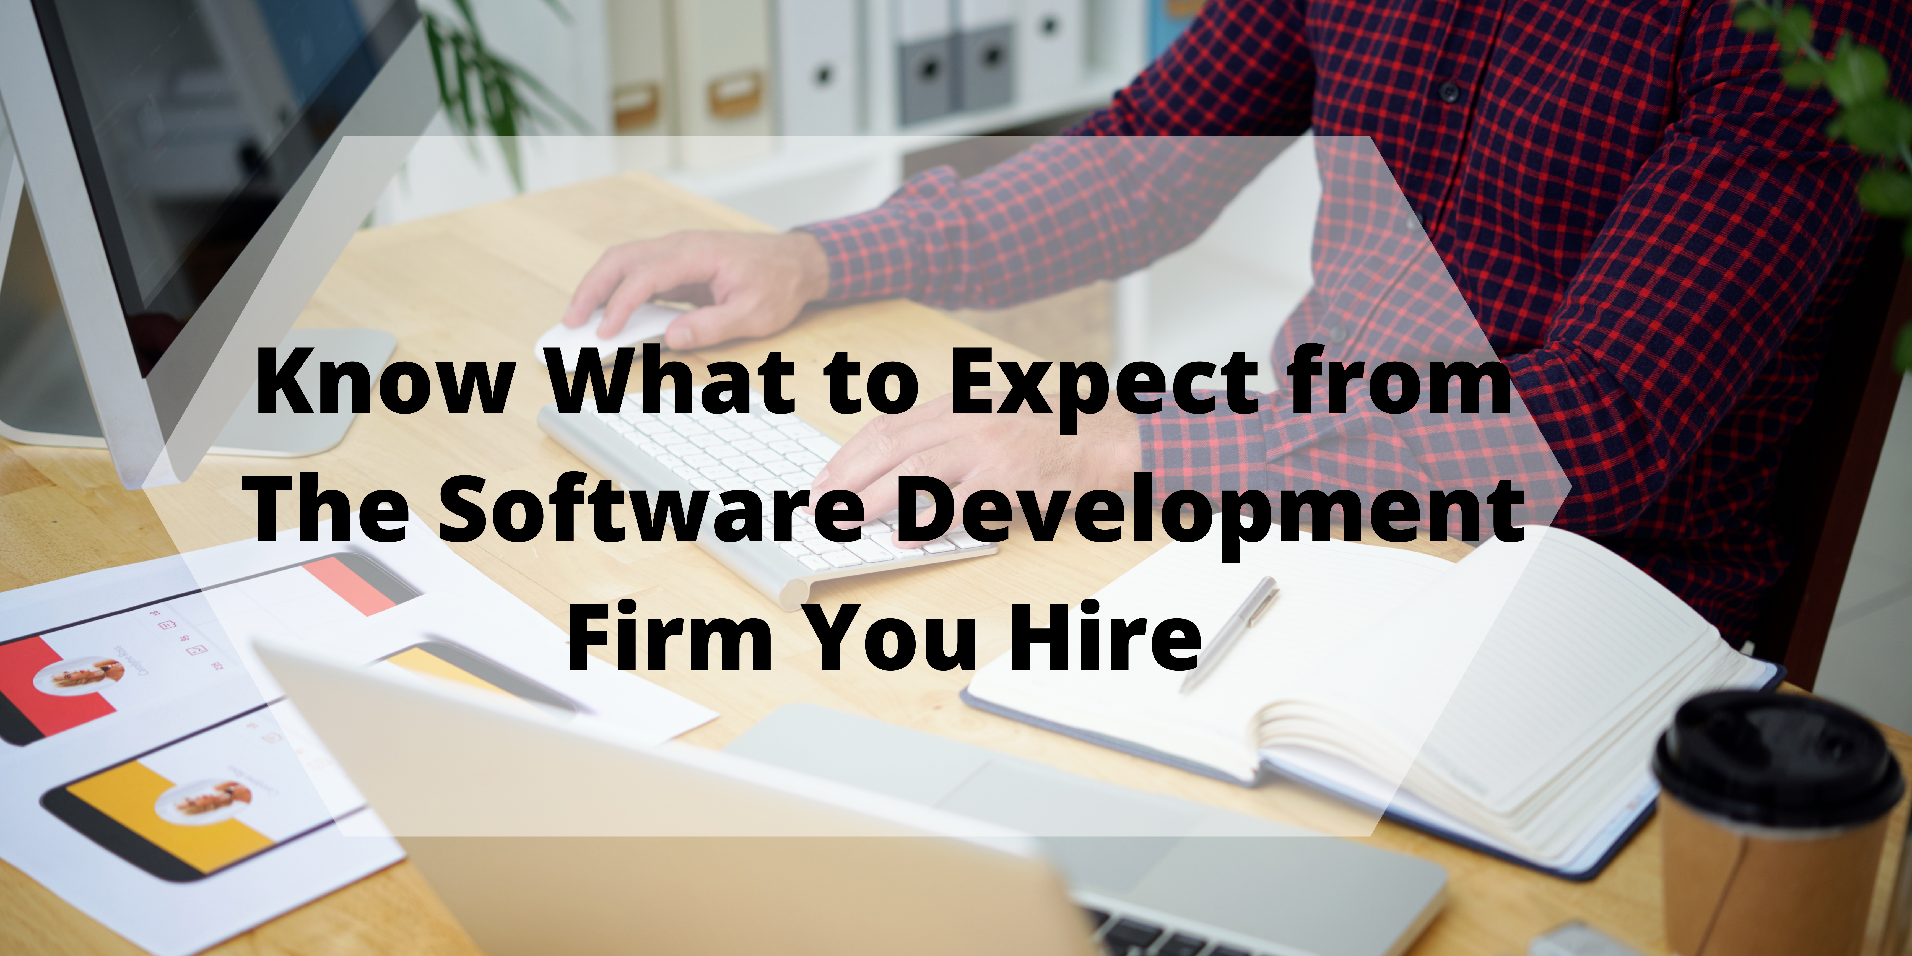 Know What to Expect from The Software Development Firm You Hire